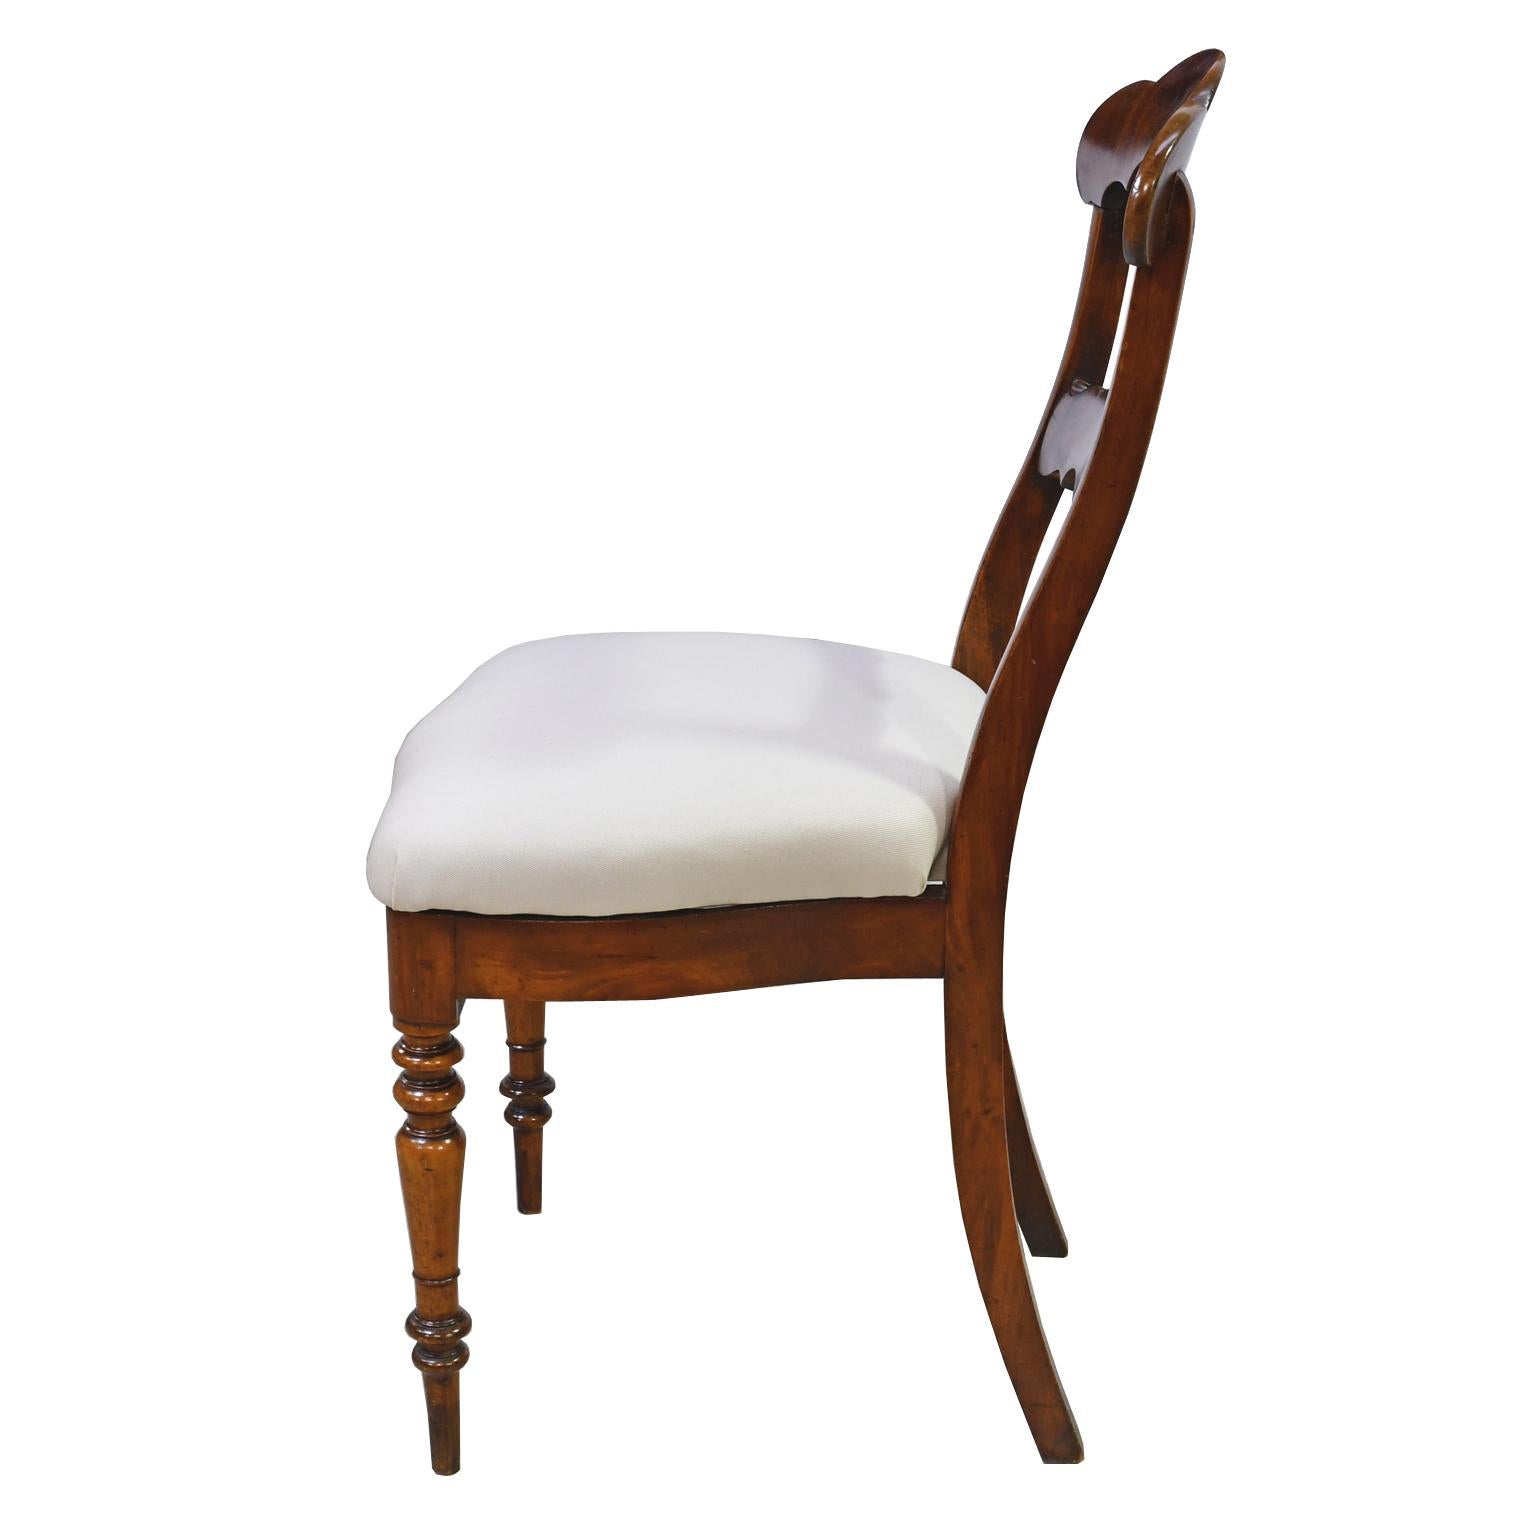 German Set of 4 Biedermeier Mahogany Dining Chairs with Upholstered Seat, circa 1830